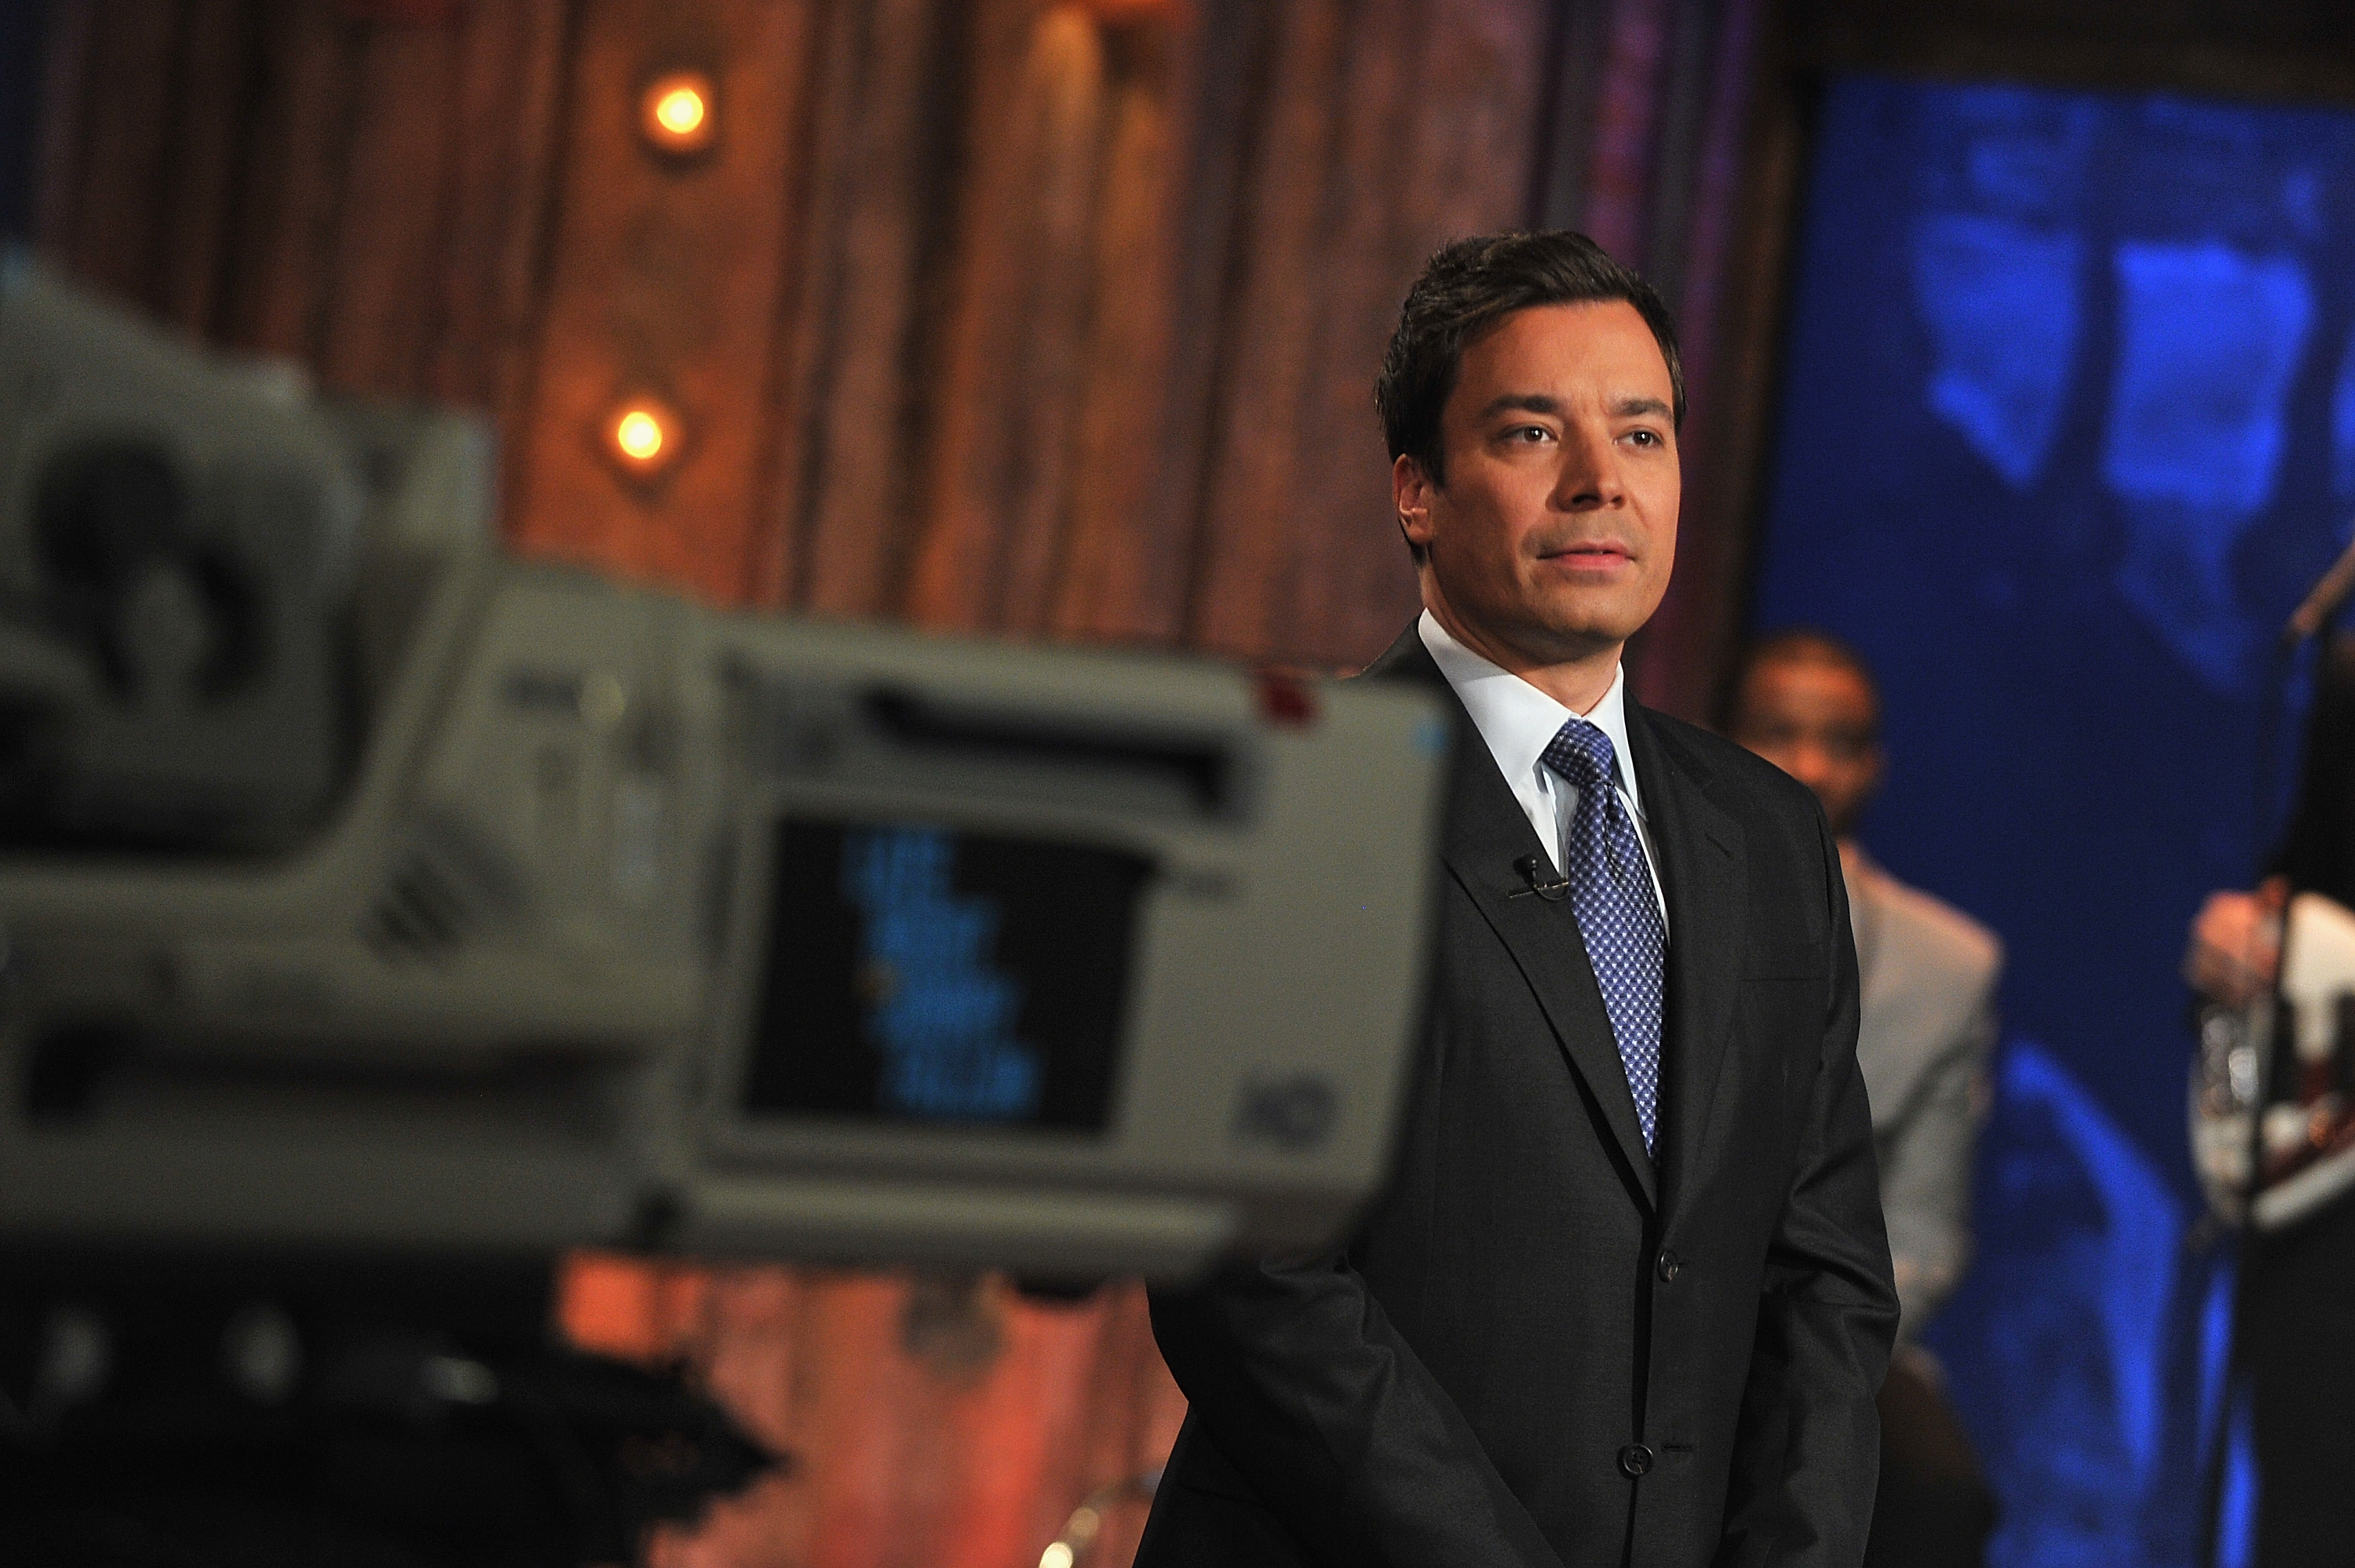 A camera points at Jimmy during taping of his show